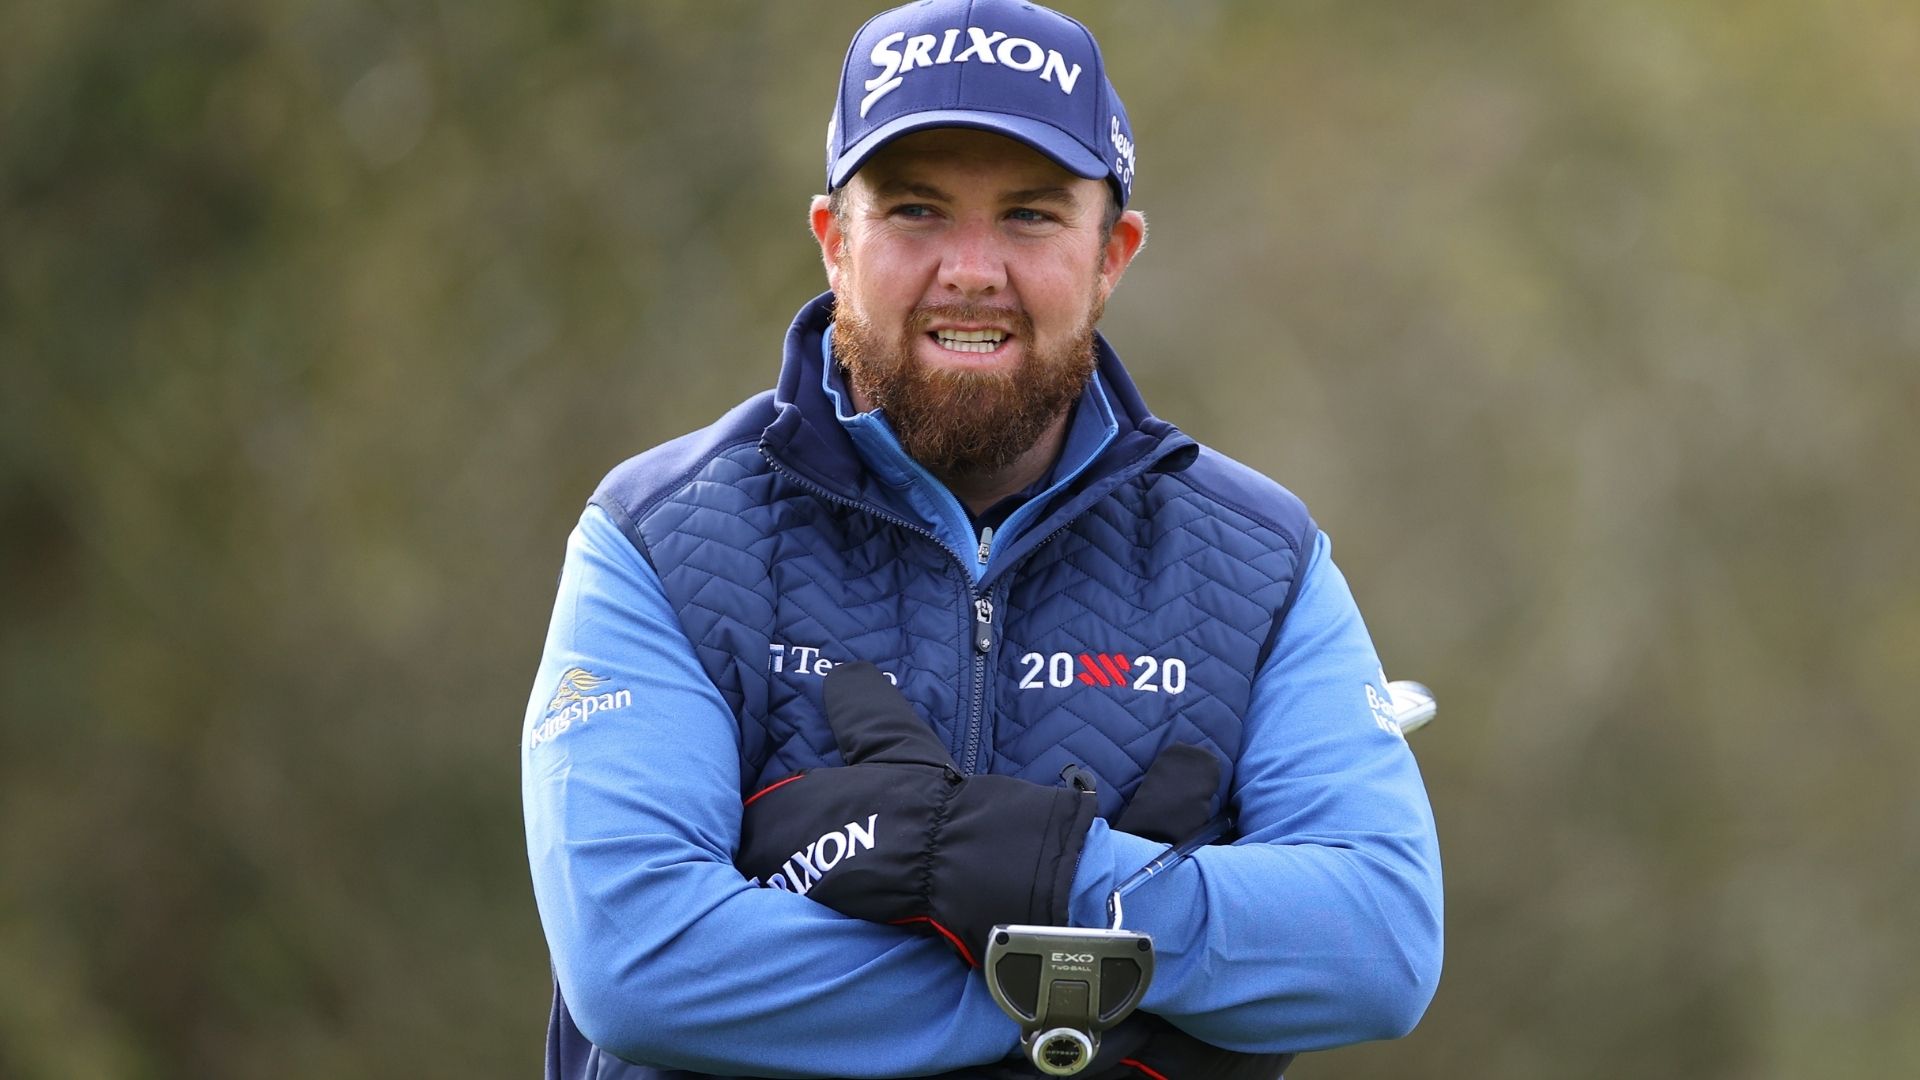 Shane Lowry supports the campaign to promote women's sports

